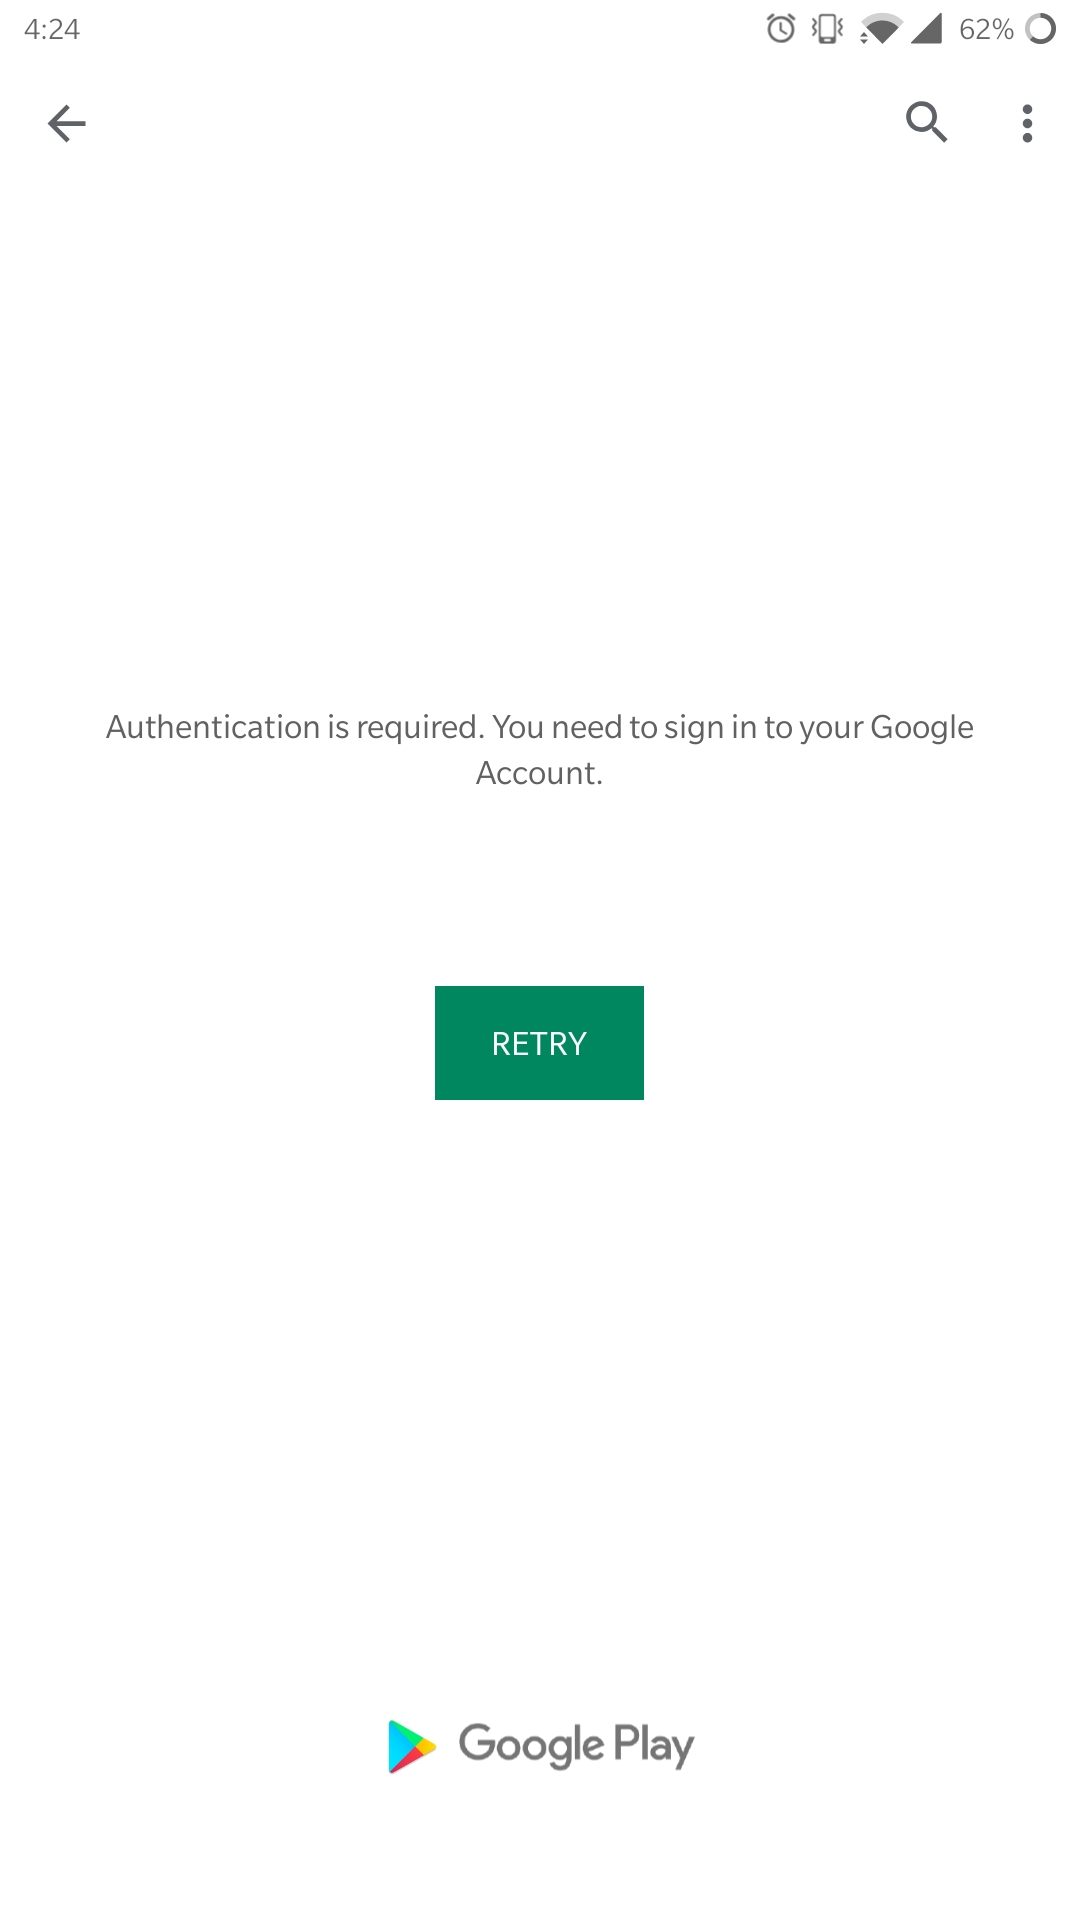 Later google play tinder to try connect cannot please again Resolve app